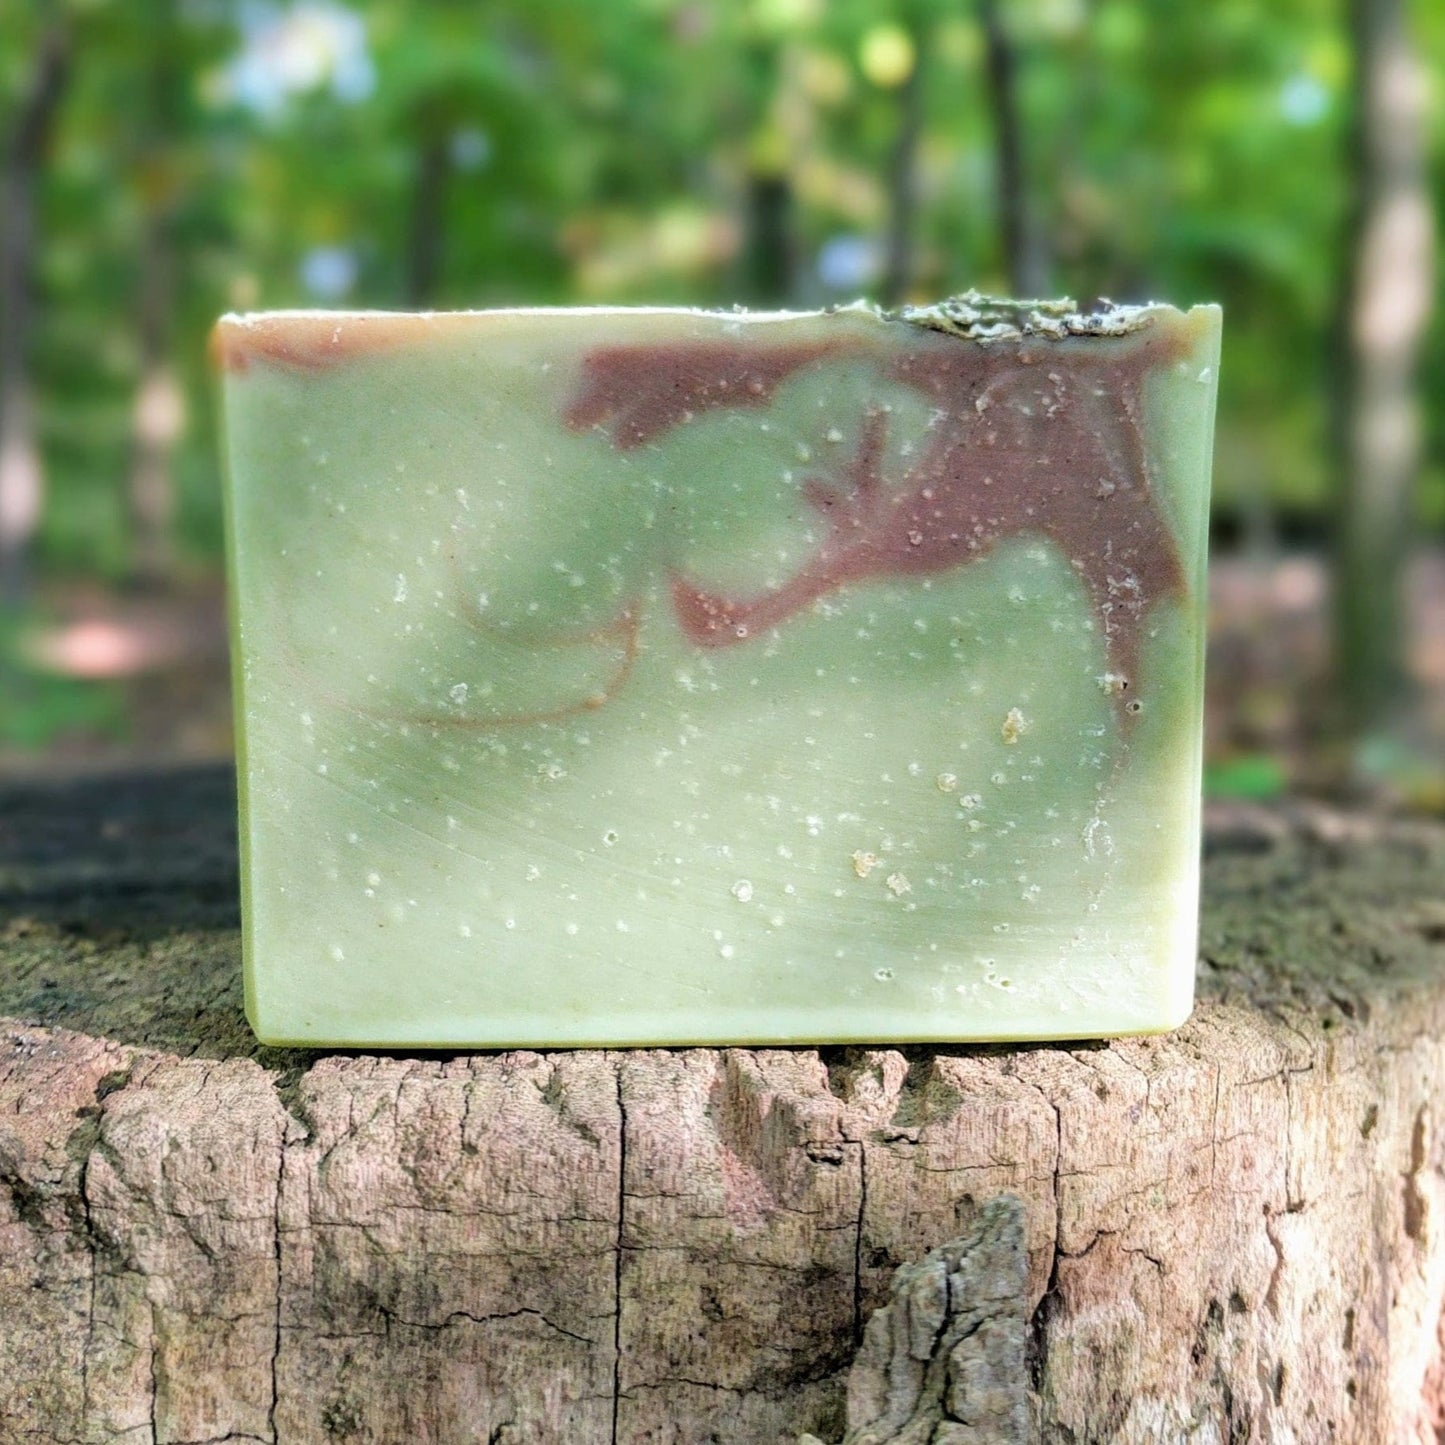 SPRUCED UP - Black Spruce & Peppermint Soap